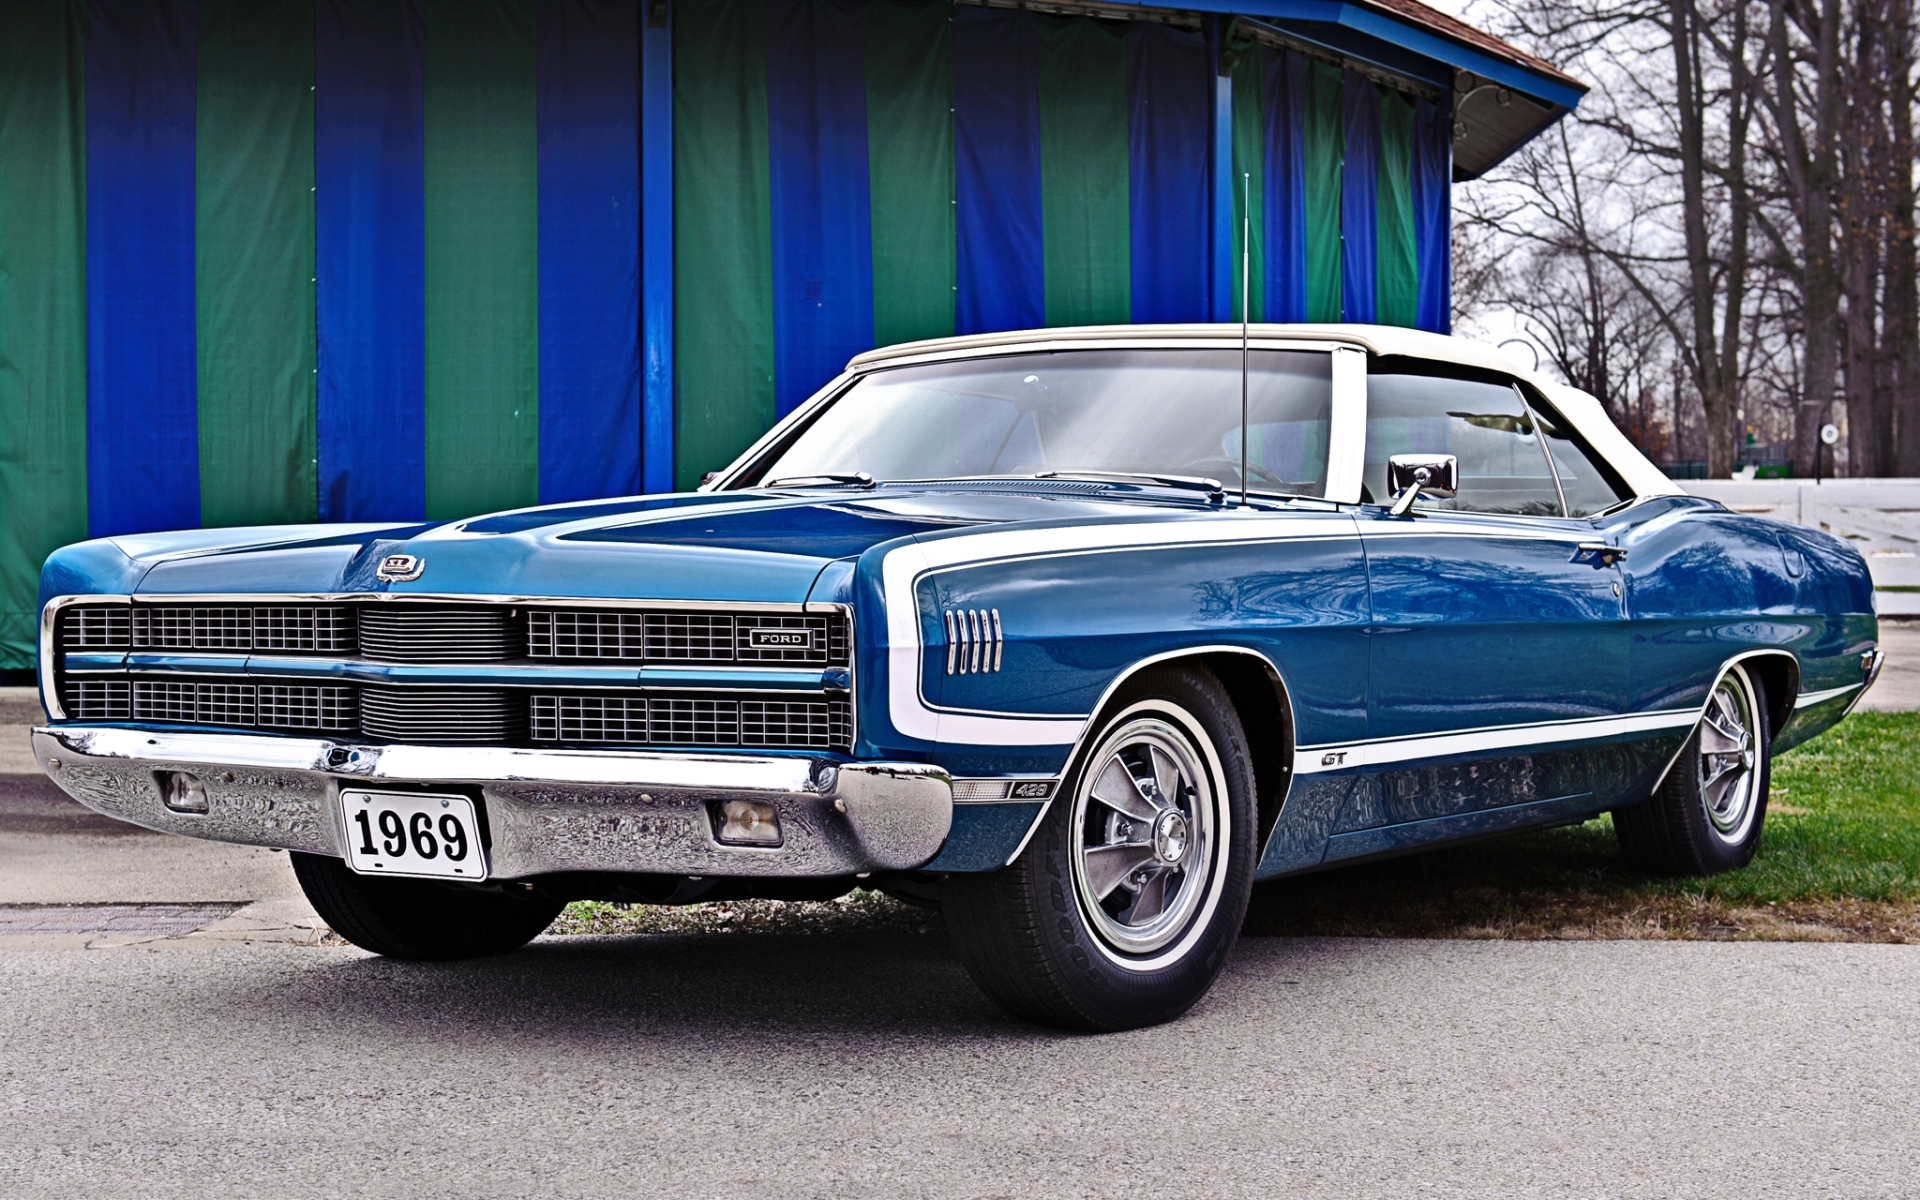 Ford Galaxie Xl HD Wallpaper Background Image